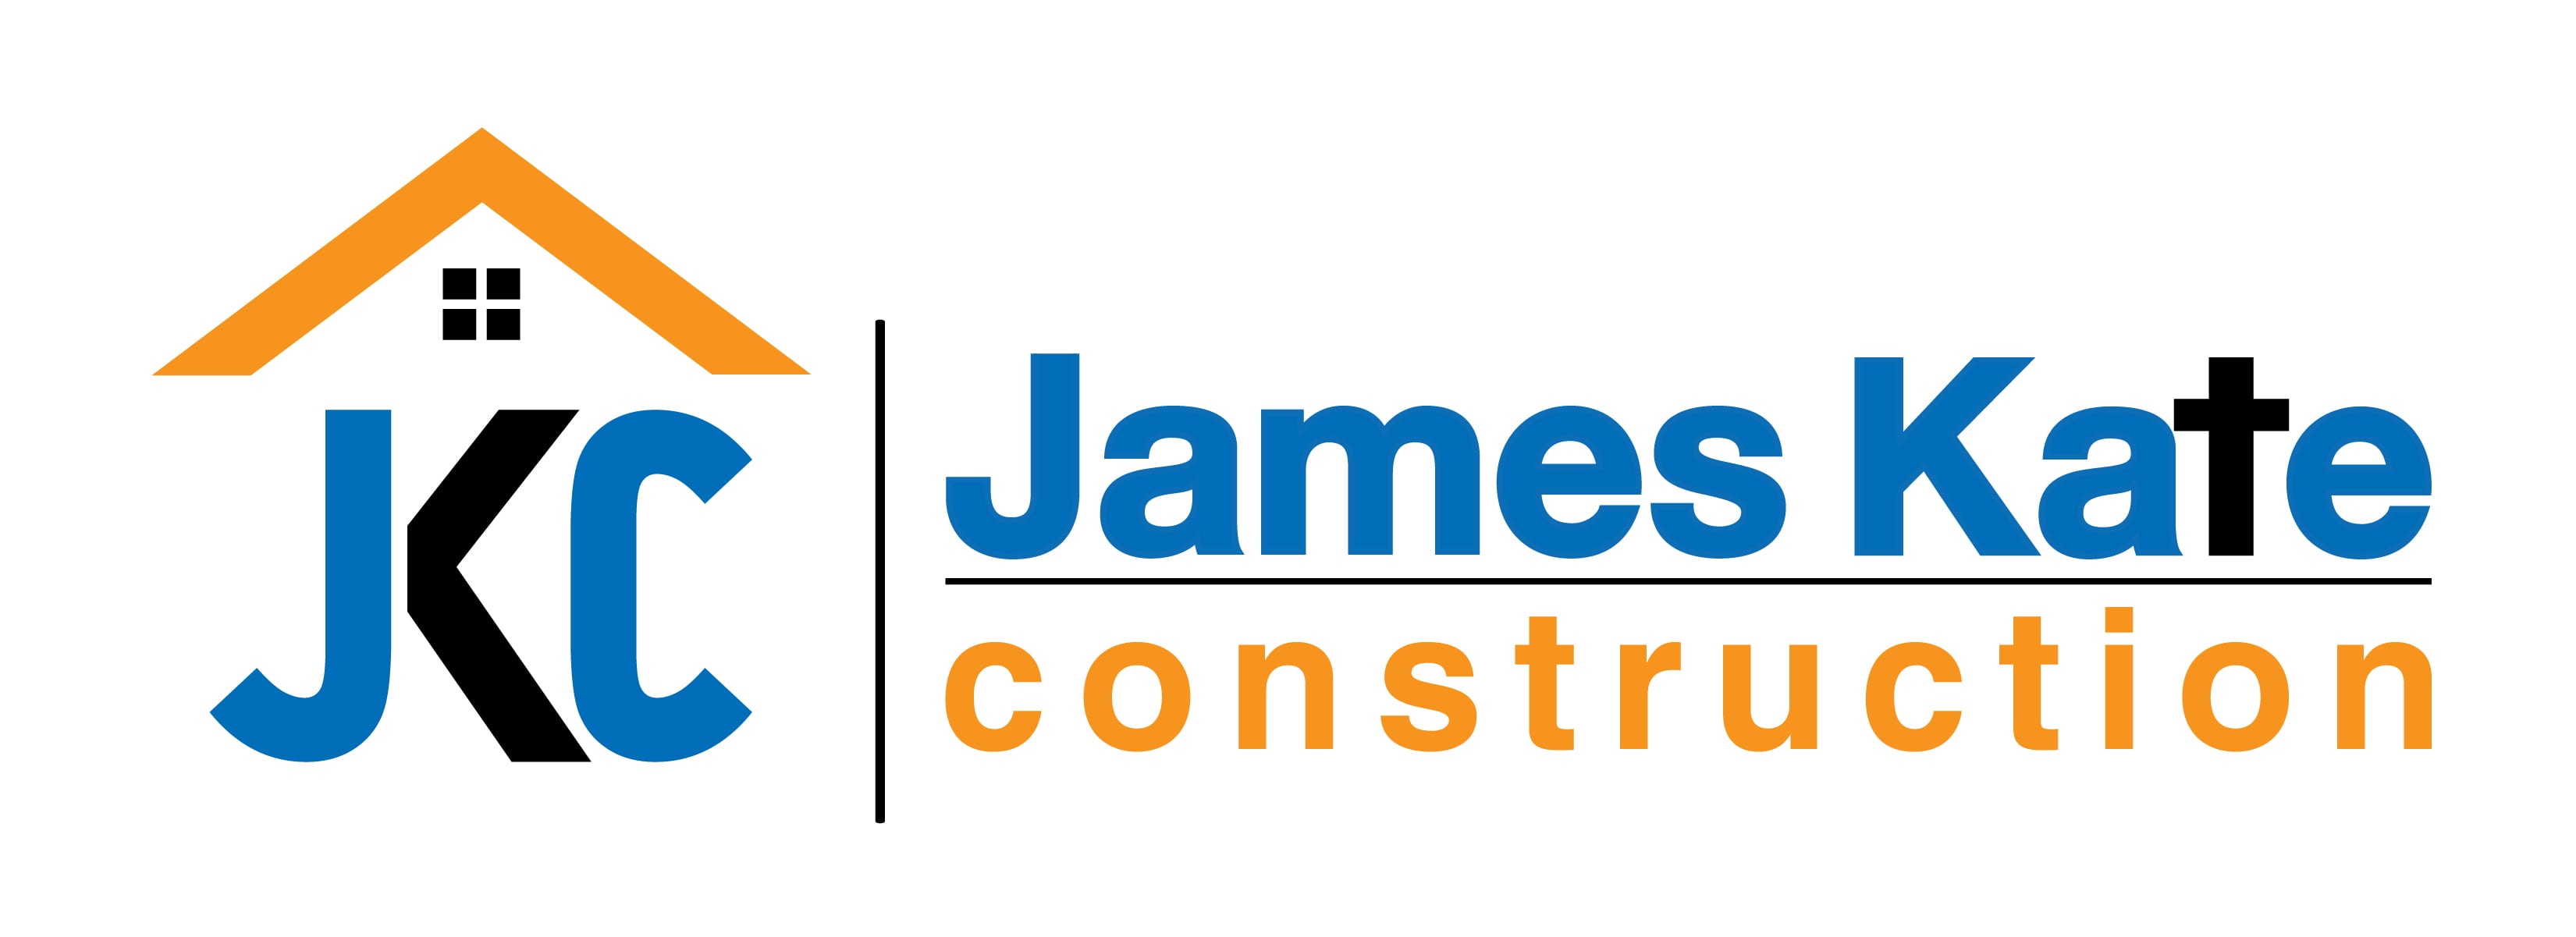 James Kate Construction: Roofing, Painting & Windows Is A Superior Contractor In Arlington, TX